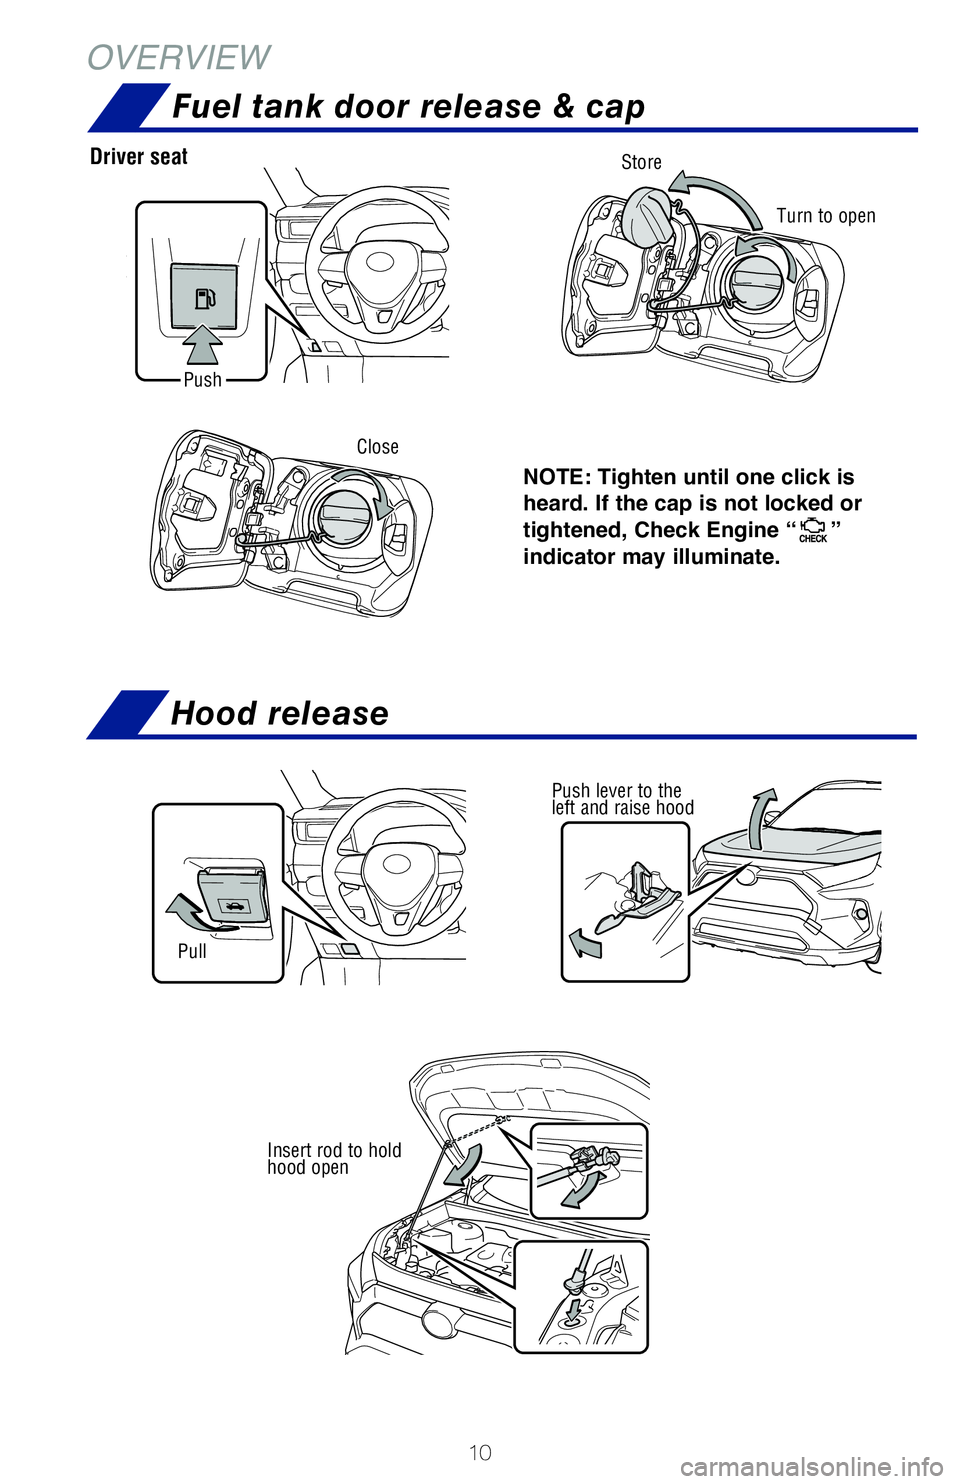 TOYOTA RAV4 HYBRID 2020  Owners Manual (in English) 10
OVERVIEW
NOTE: Tighten until one click is 
heard. If the cap is not locked or 
tightened, Check Engine “
” 
indicator may illuminate.
Push lever to the 
left and raise hood
Insert rod to hold 
